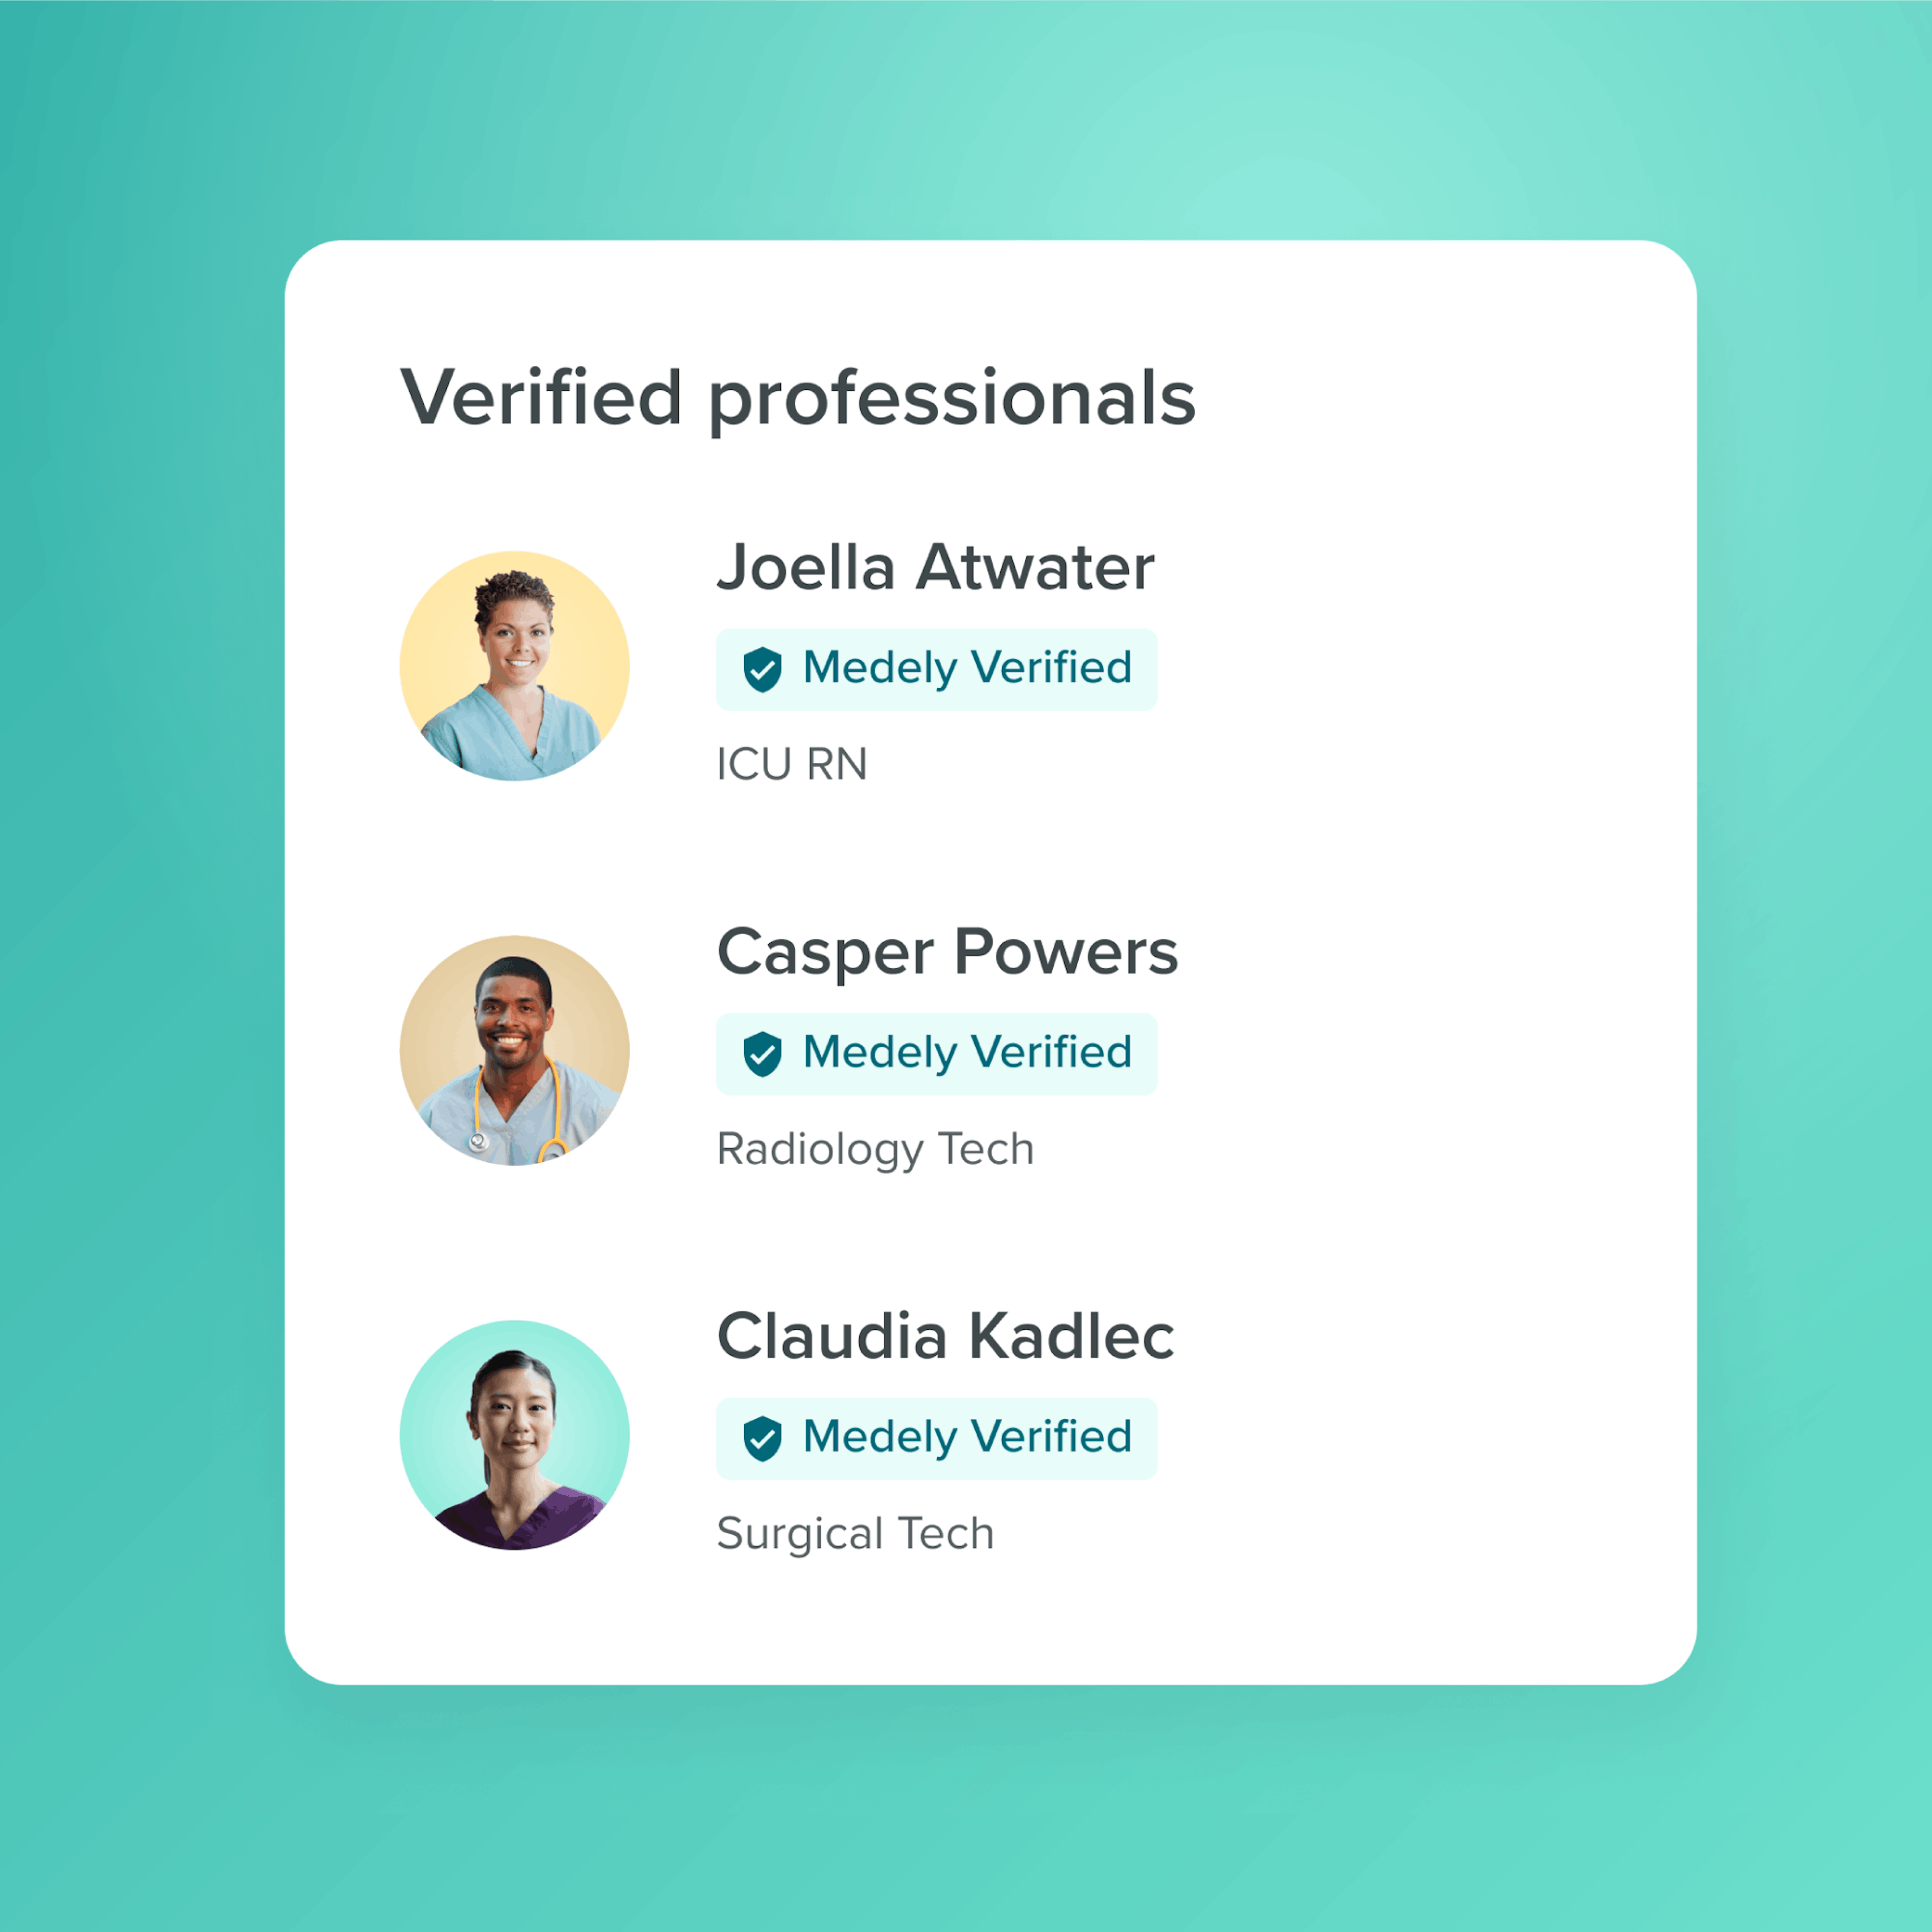 List of verified professionals from Medely